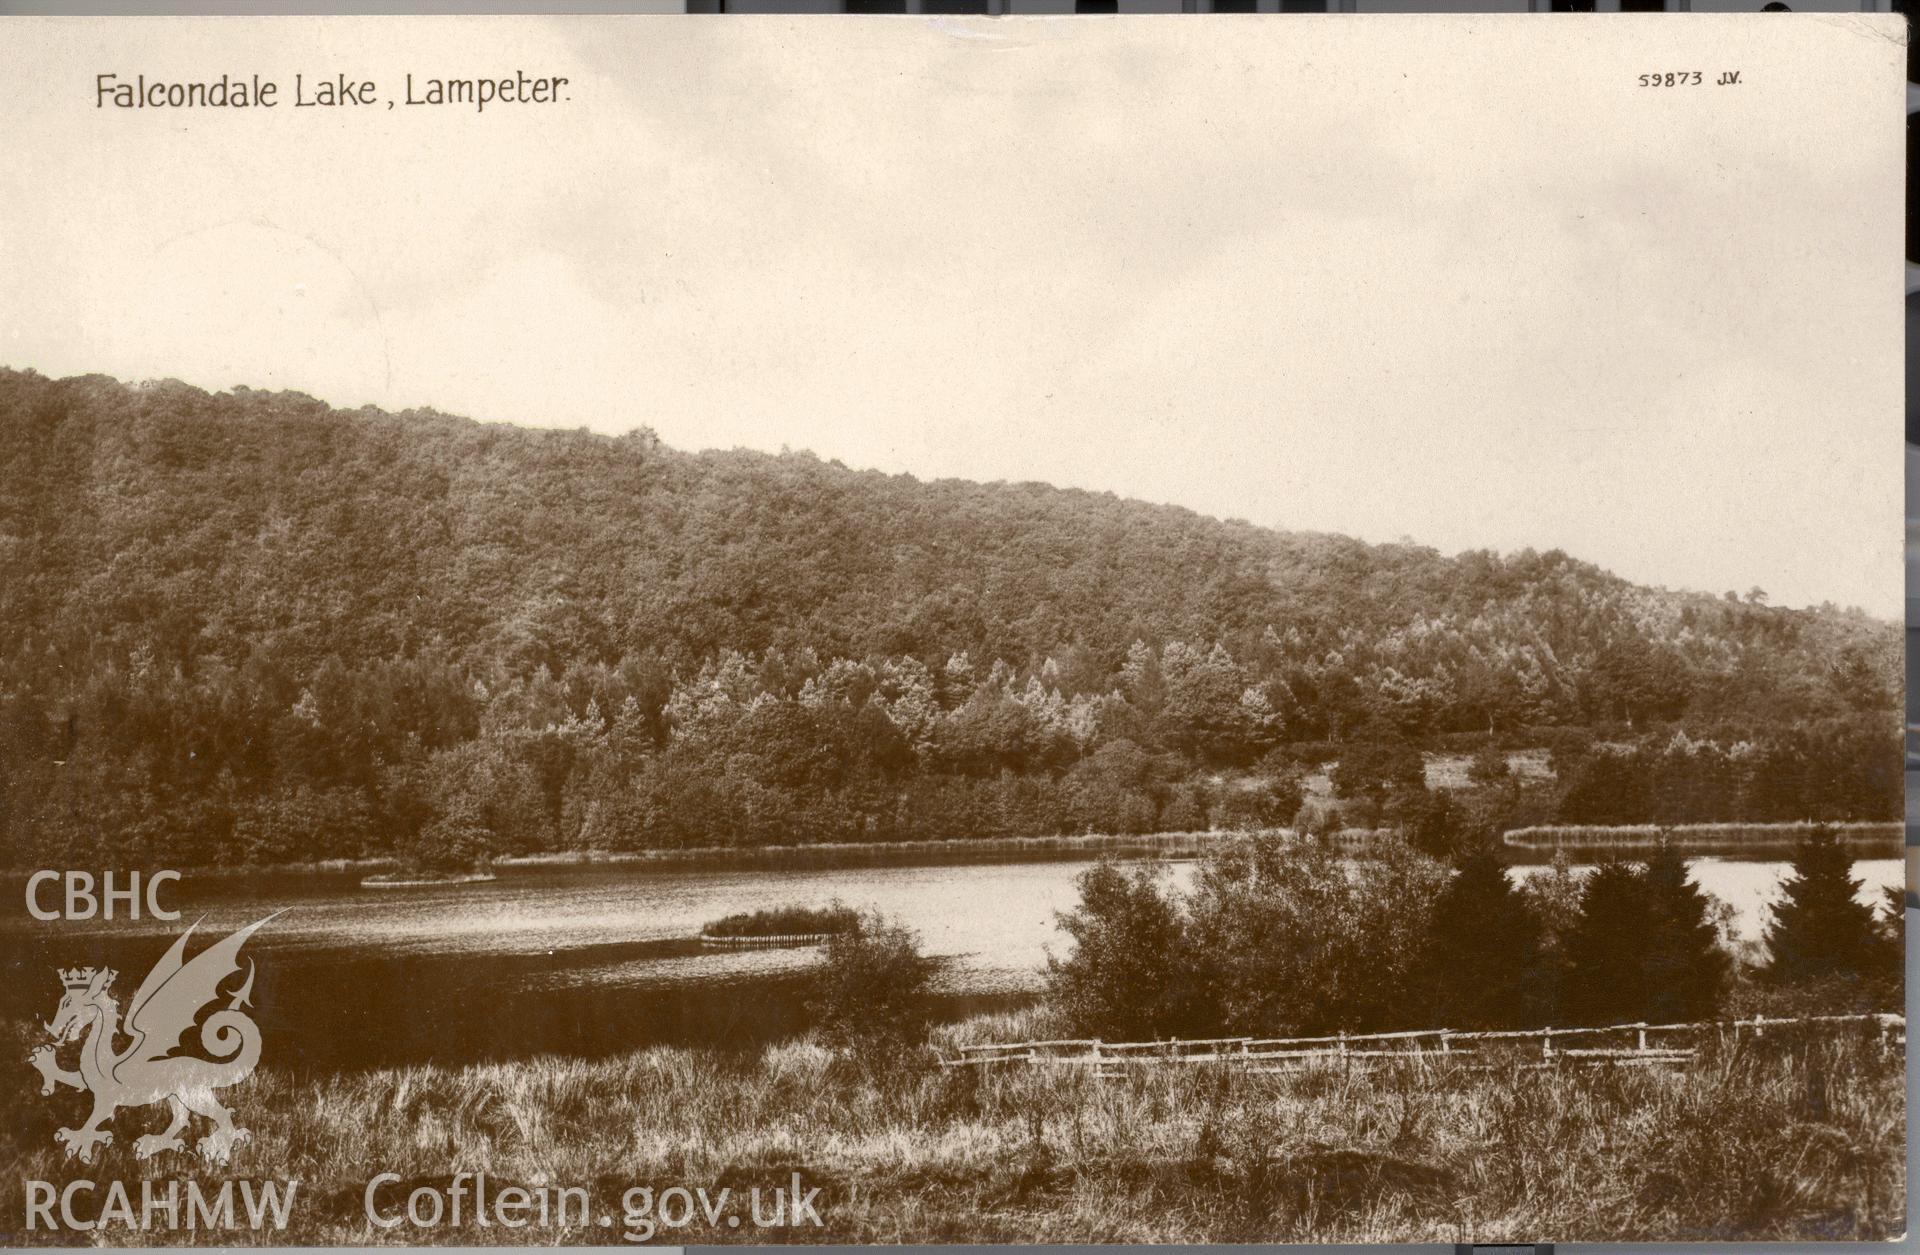 Digitised postcard image of lake, Falcondale grounds, Lampeter. Produced by Parks and Gardens Data Services, from an original item in the Peter Davis Collection at Parks and Gardens UK. We hold only web-resolution images of this collection, suitable for viewing on screen and for research purposes only. We do not hold the original images, or publication quality scans.